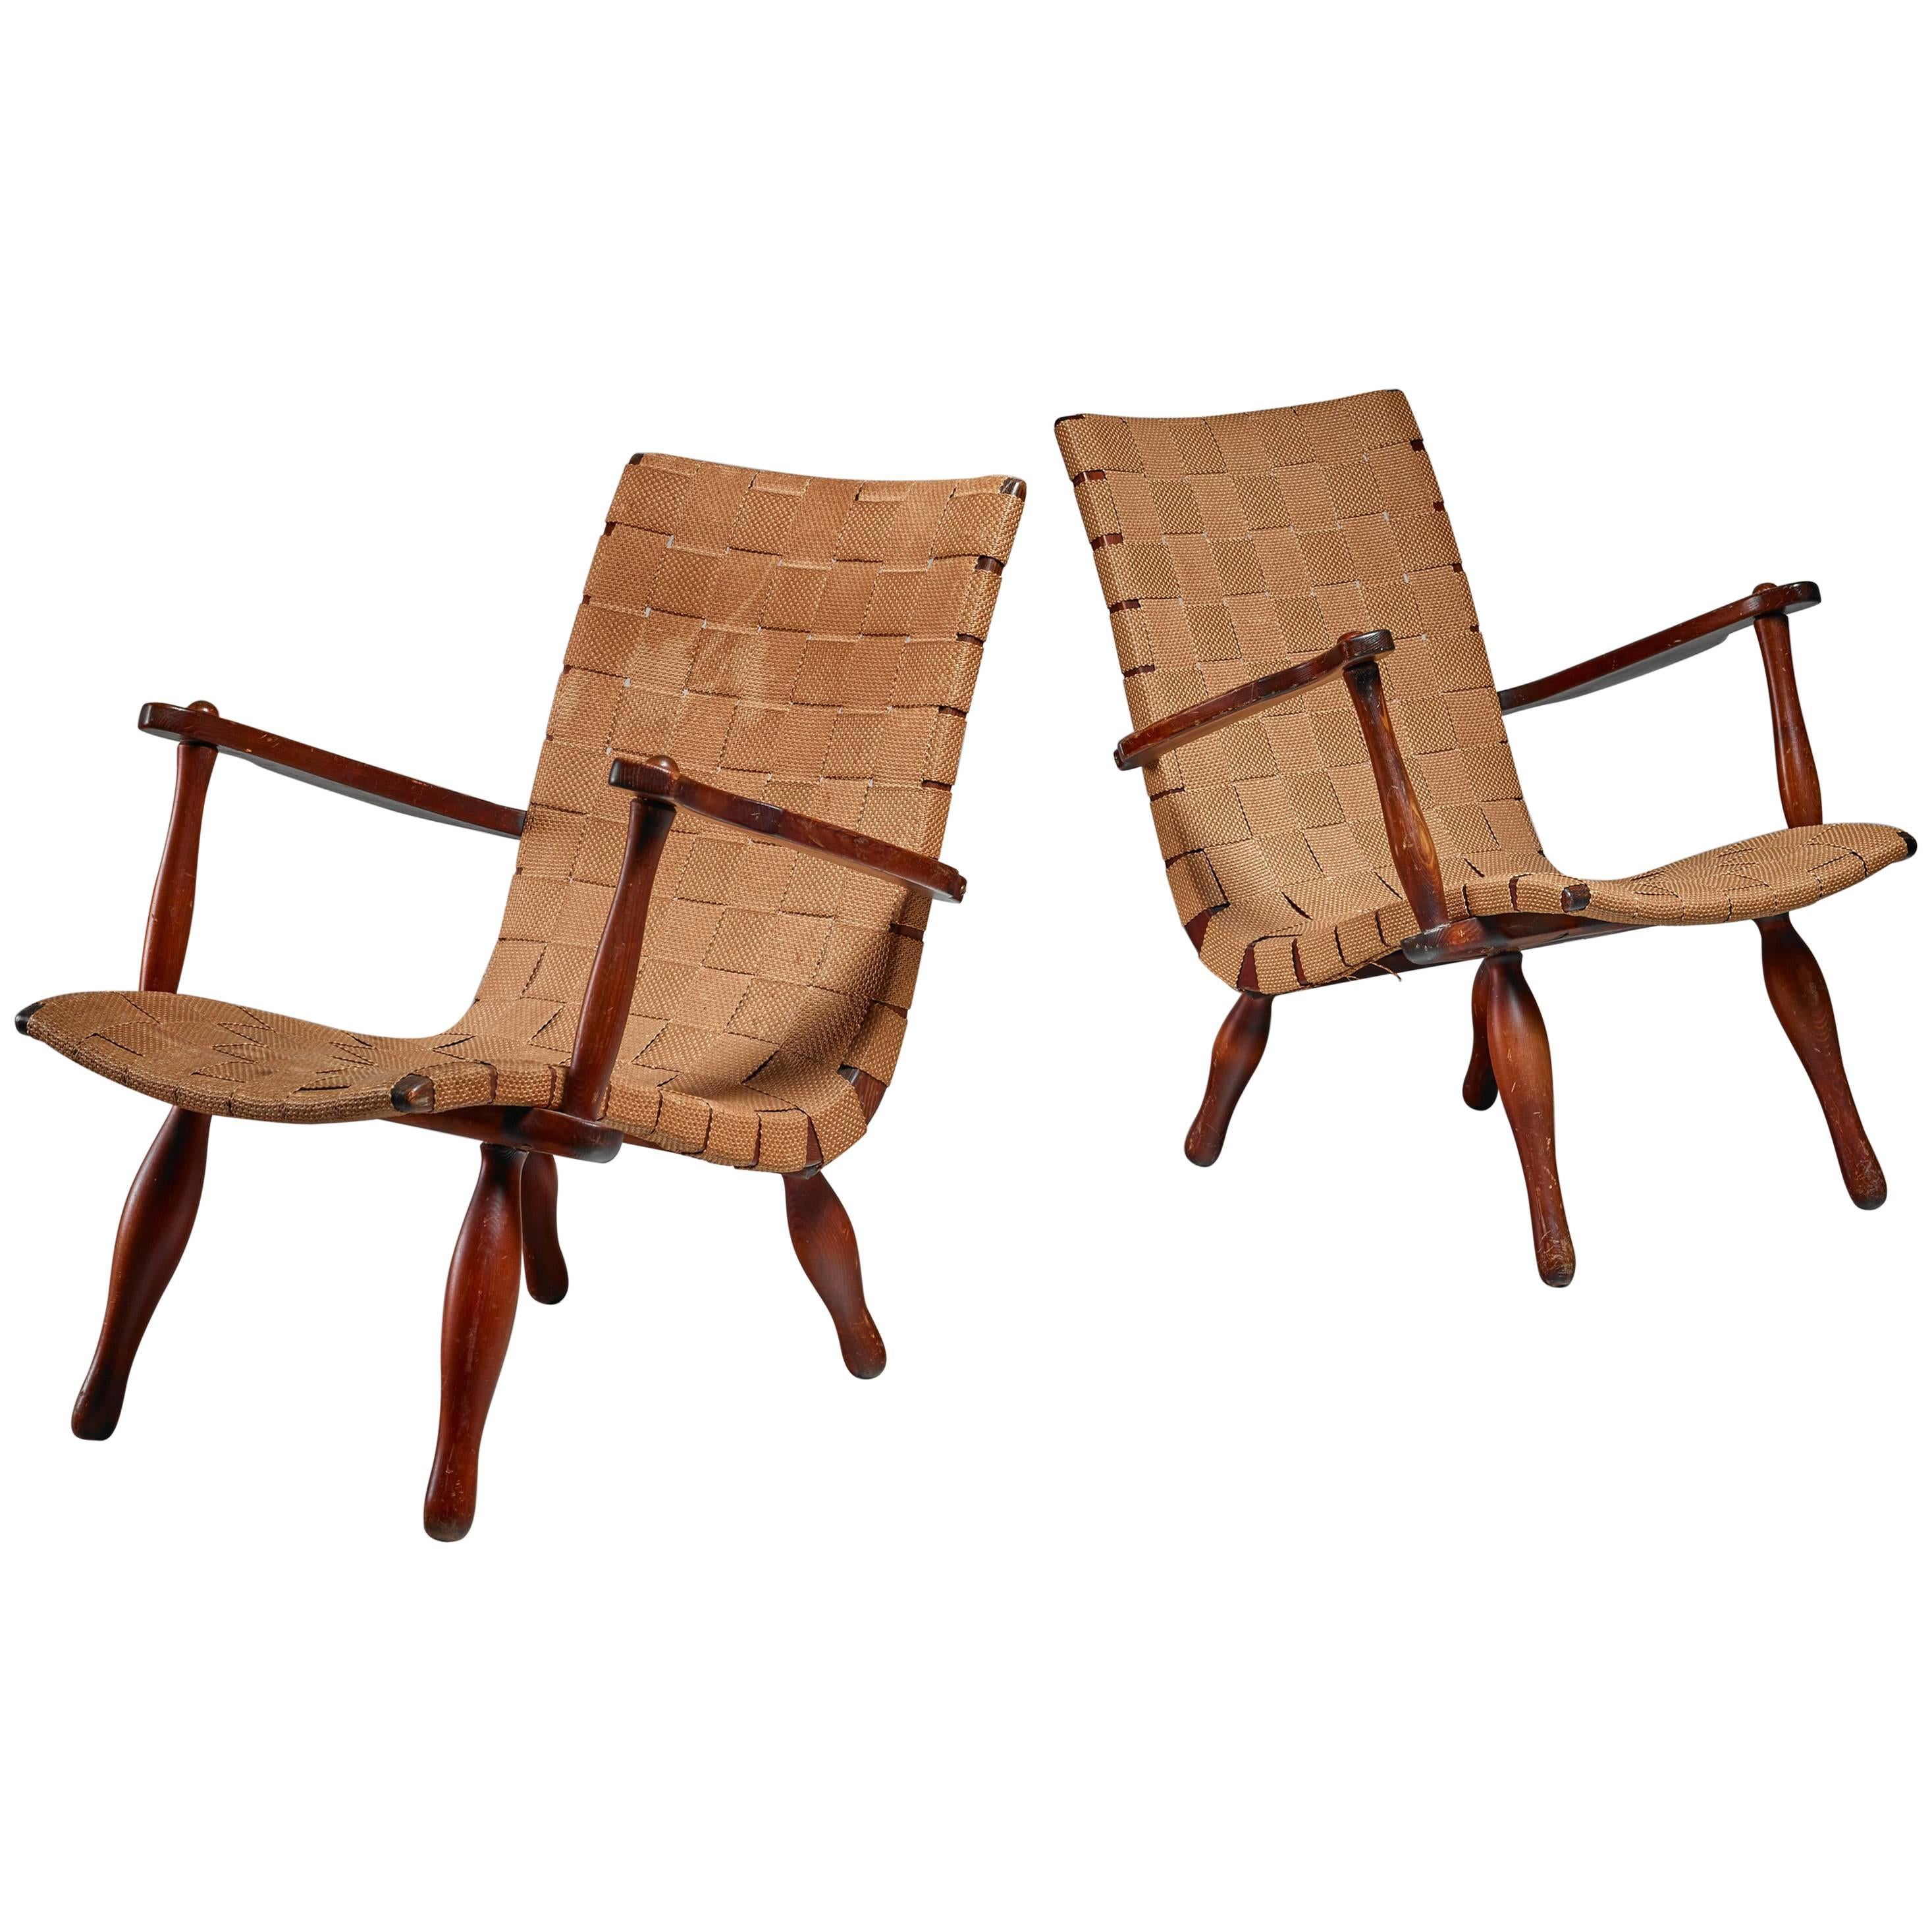 Pair of Lounge Chairs with Webbed Seating, Sweden, 1940s